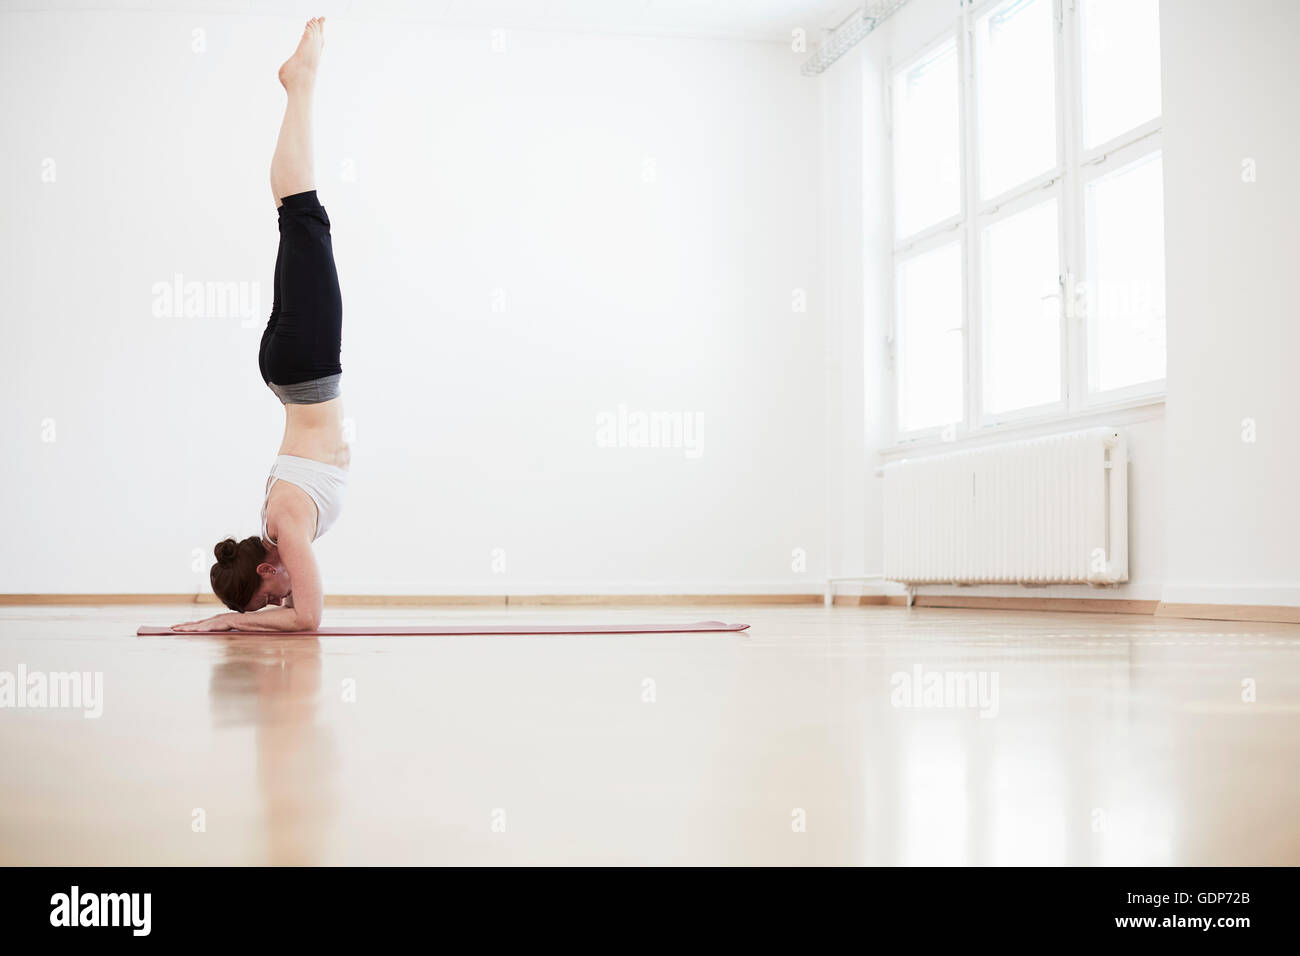 Side view of woman in studio exercice doing handstand Banque D'Images